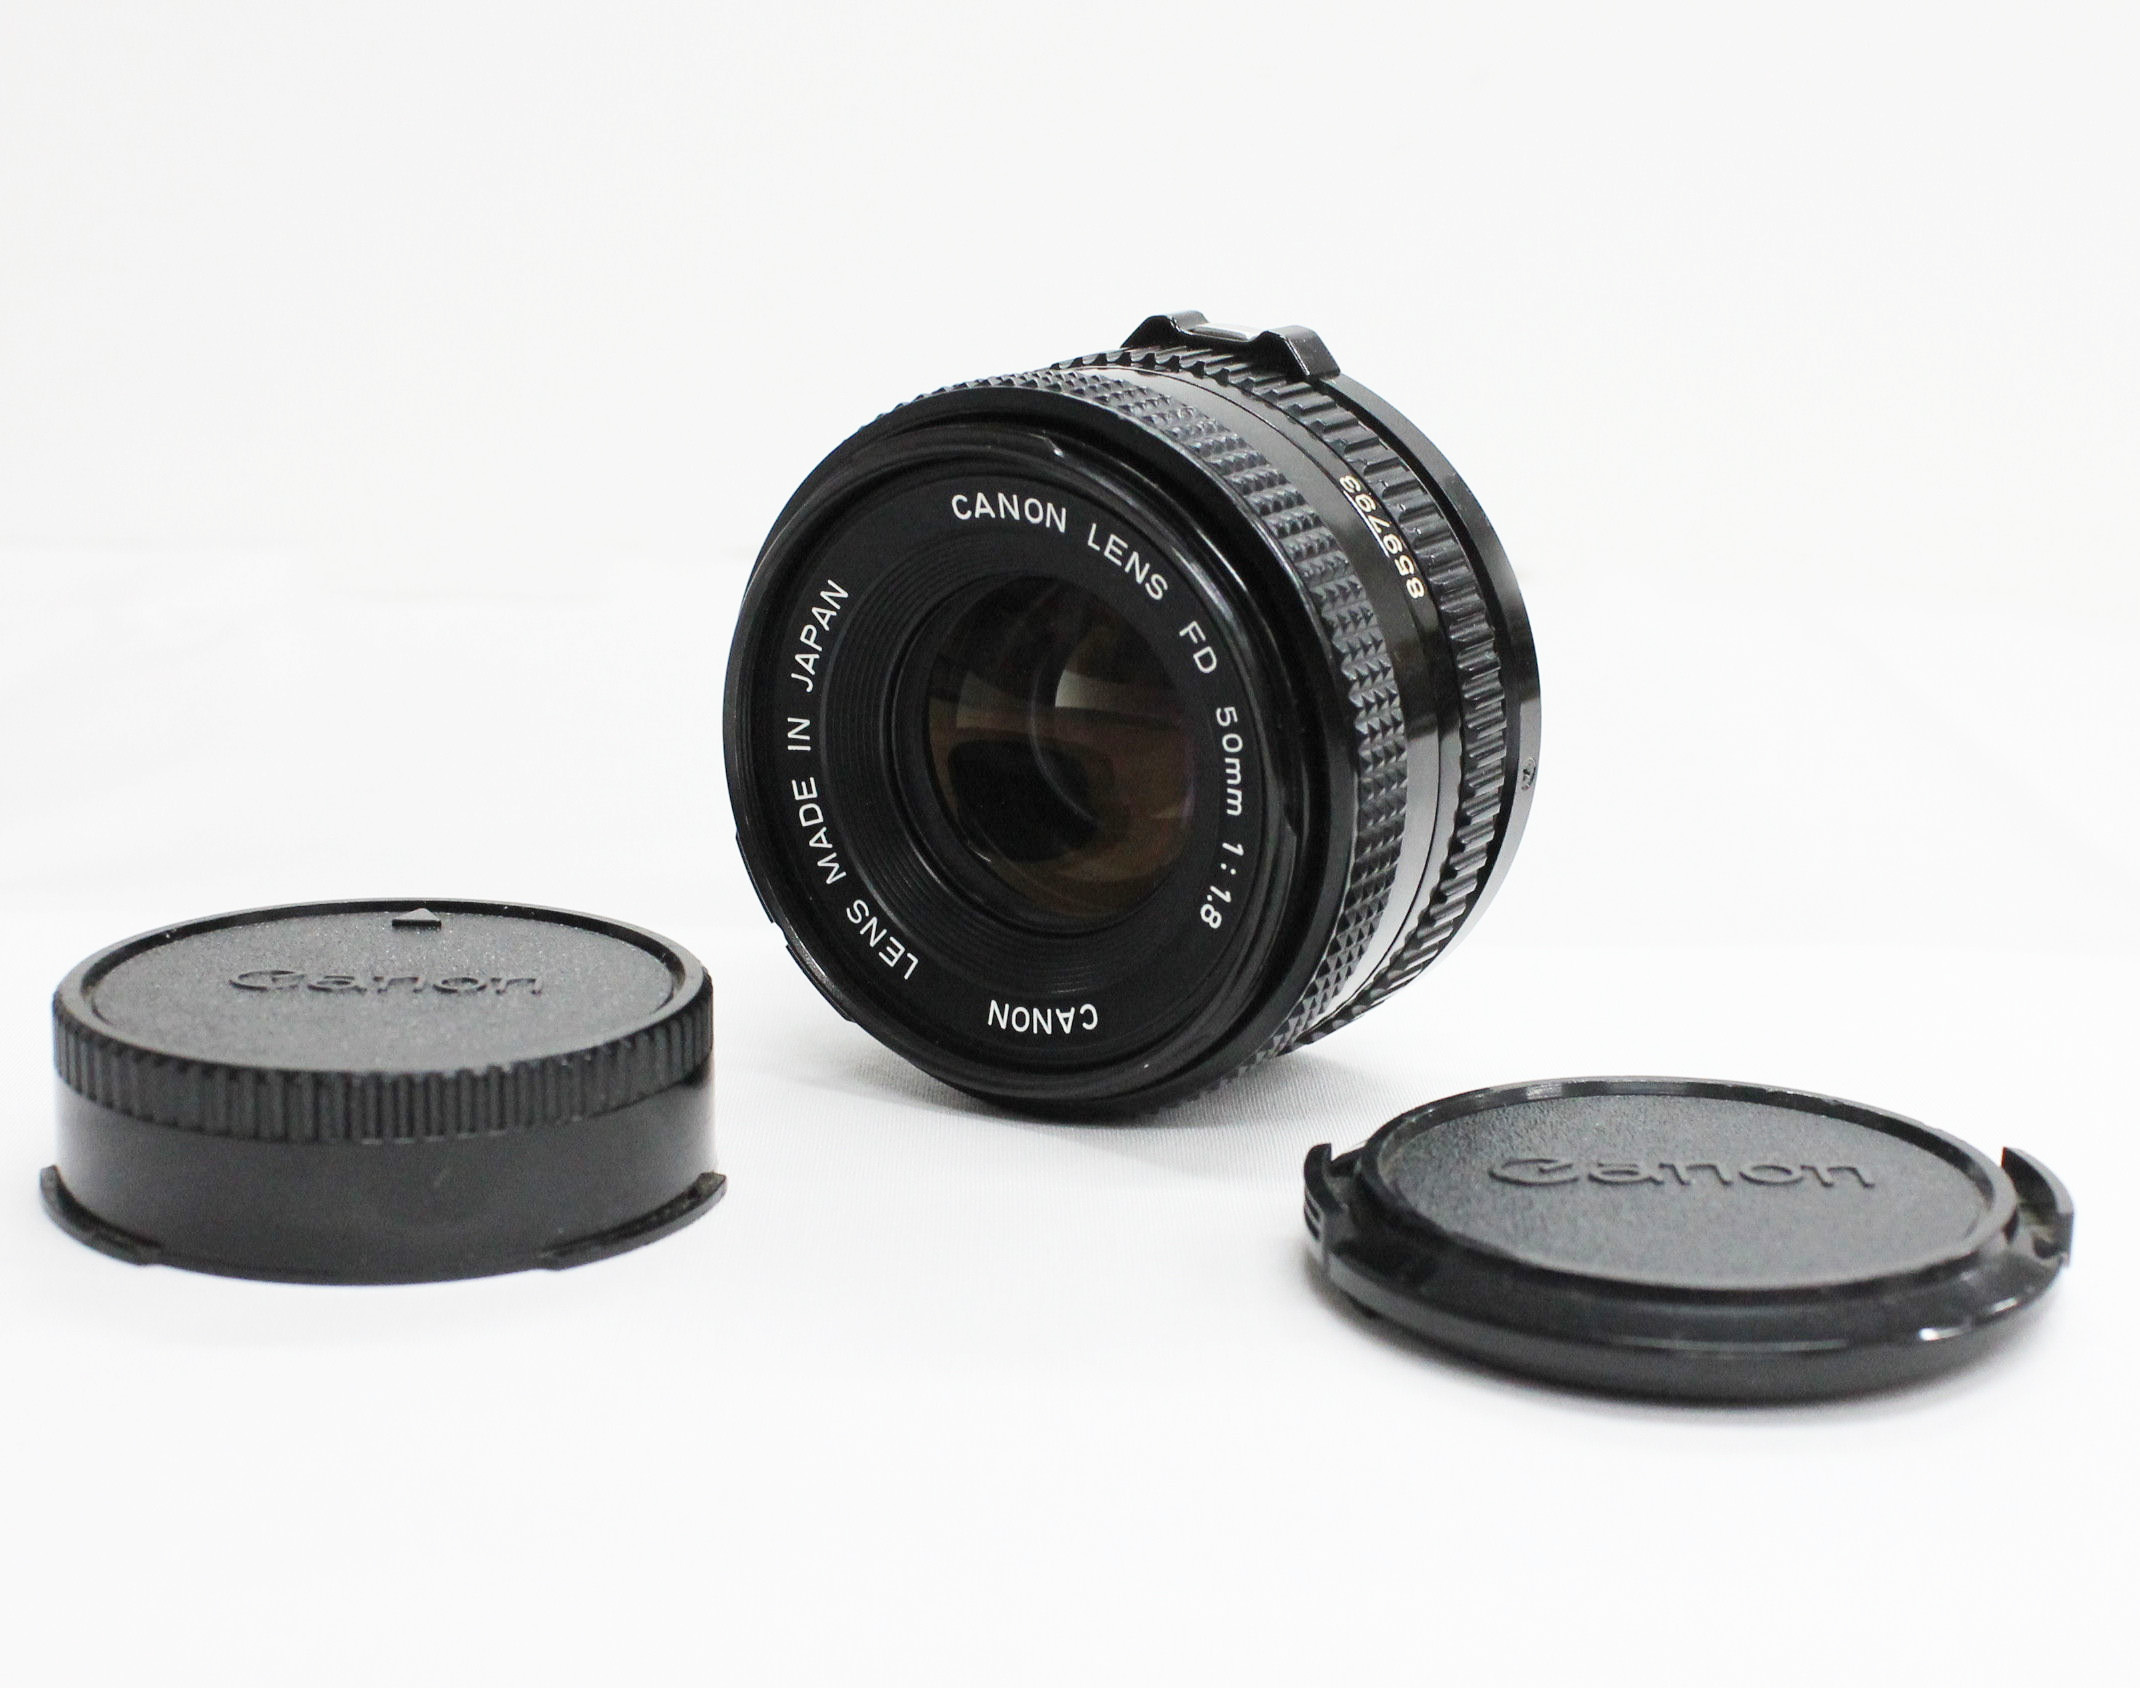 Japan Used Camera Shop | [Excellent ++++] Canon New FD NFD 50mm F/1.8 MF Prime Lens from Japan